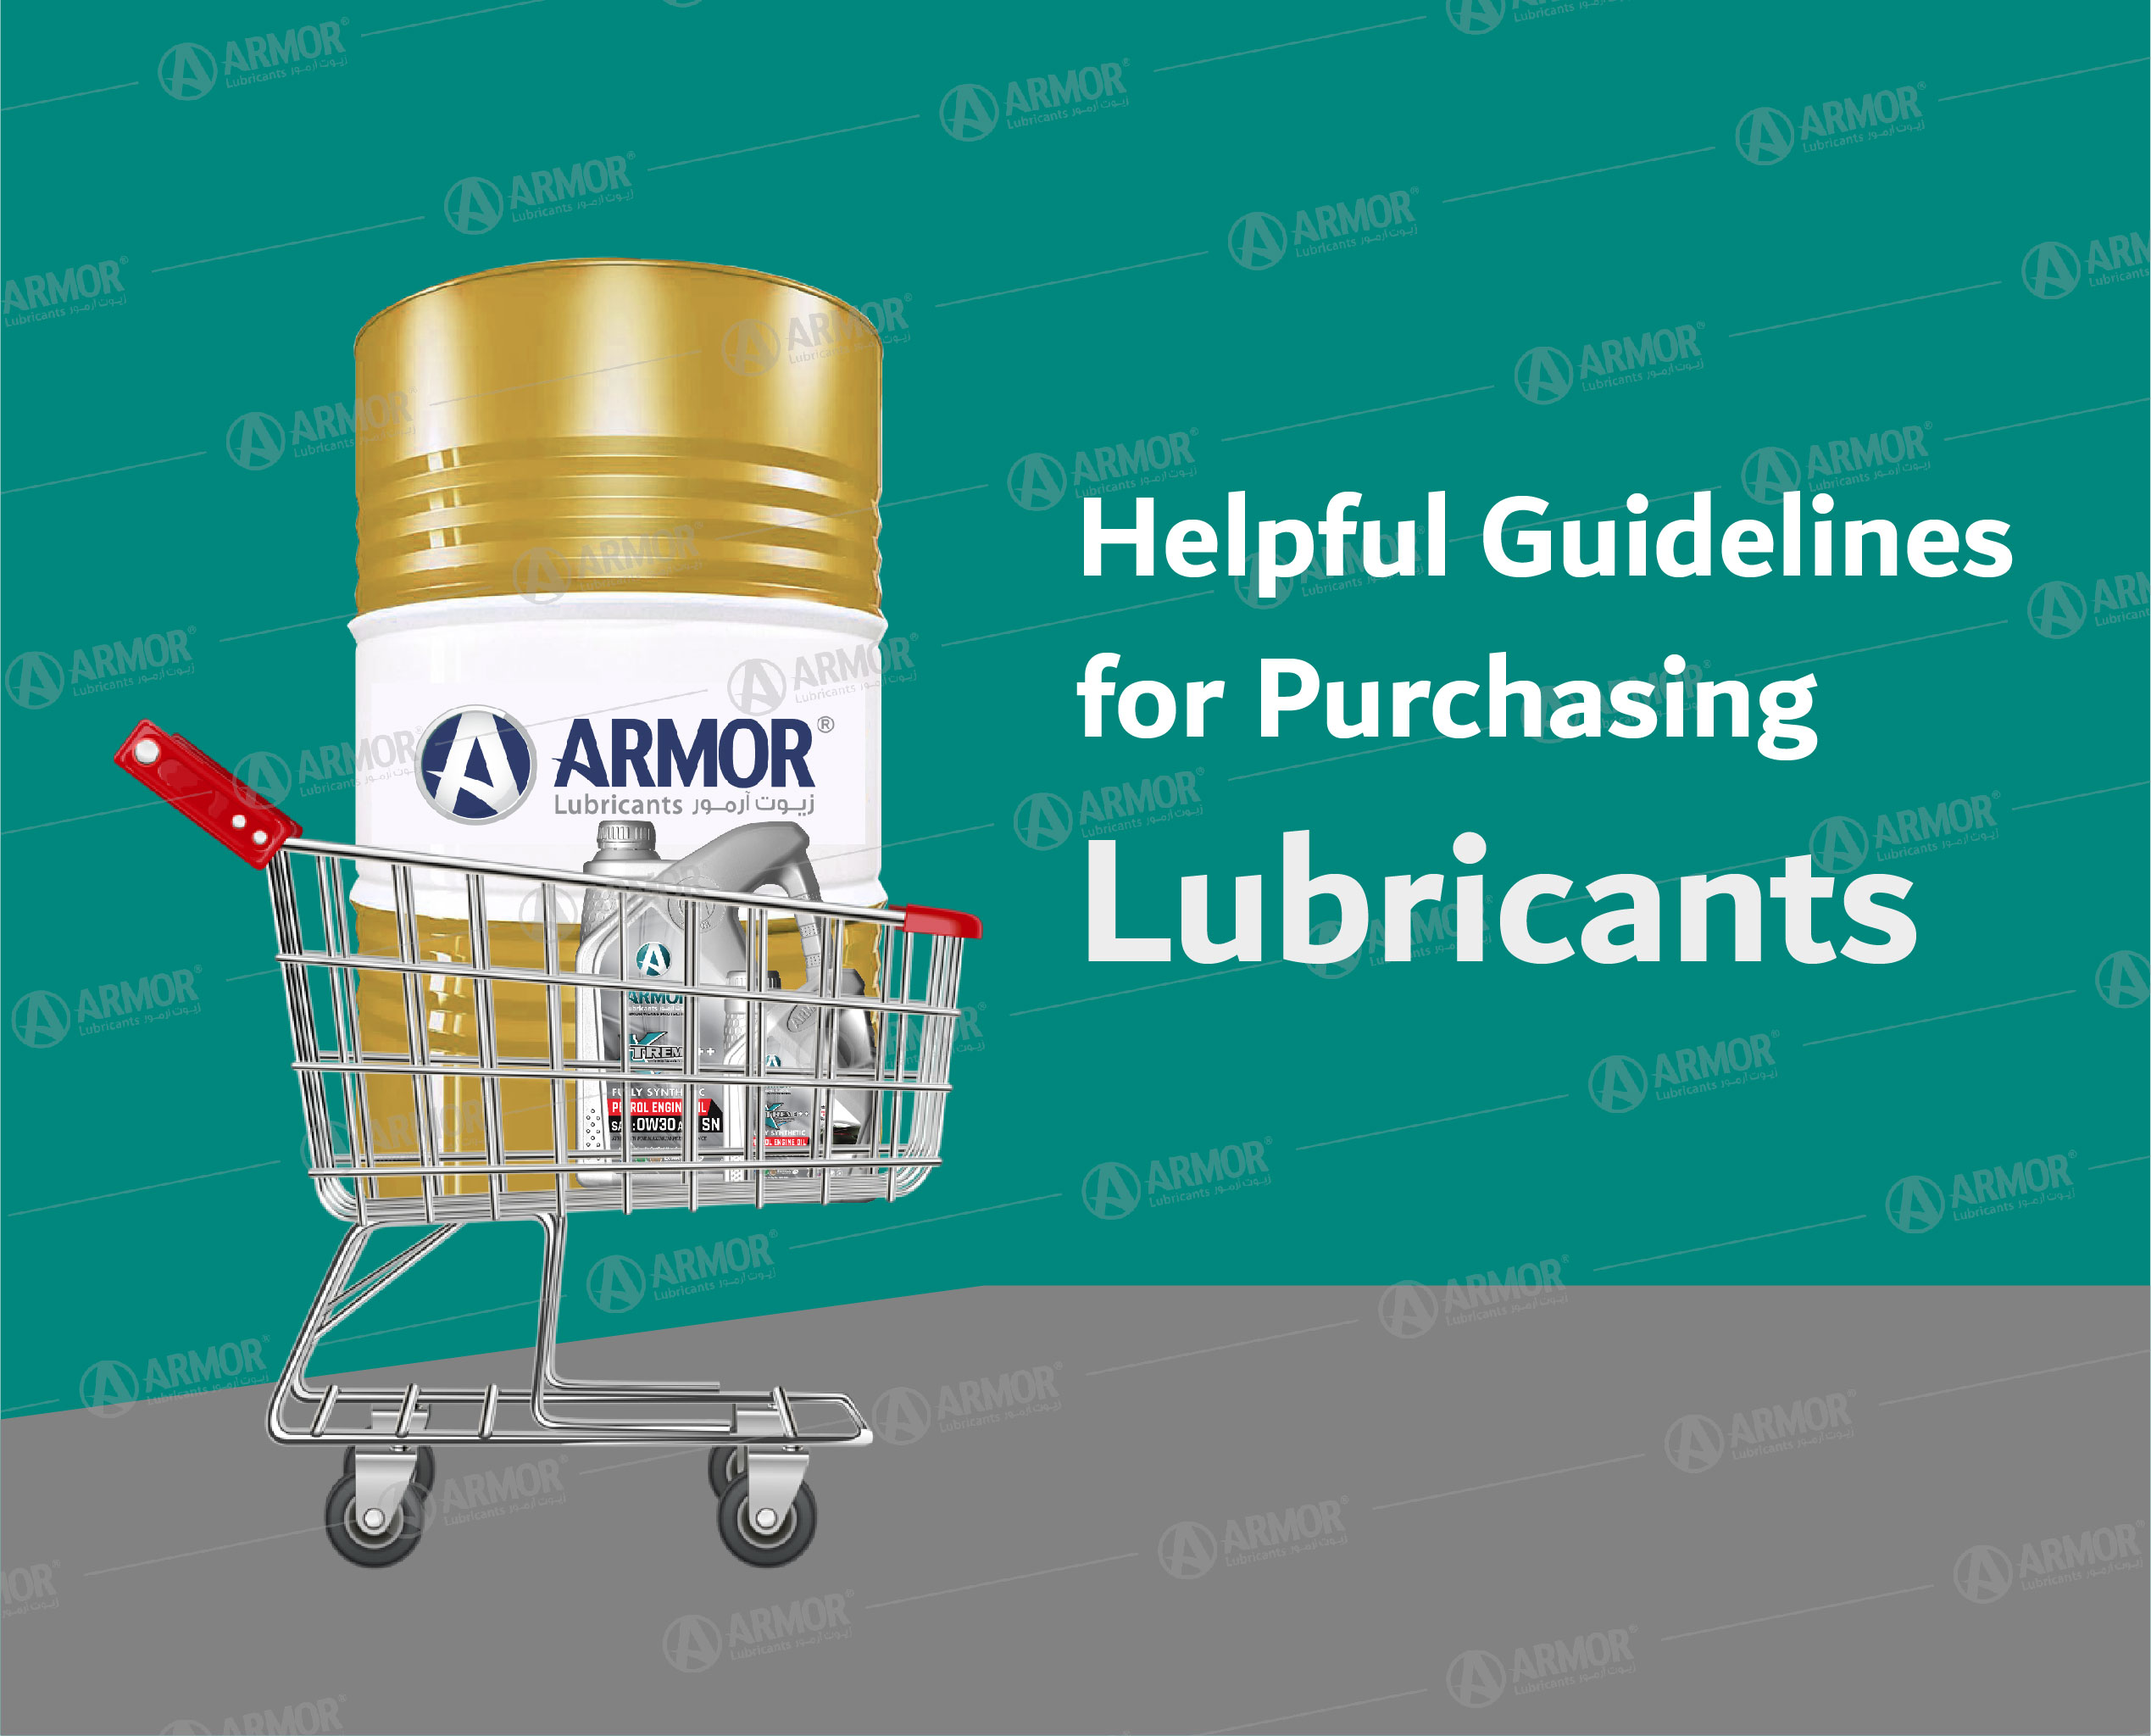 Lubricant Oil Purchase Guide from Armor Lubricants